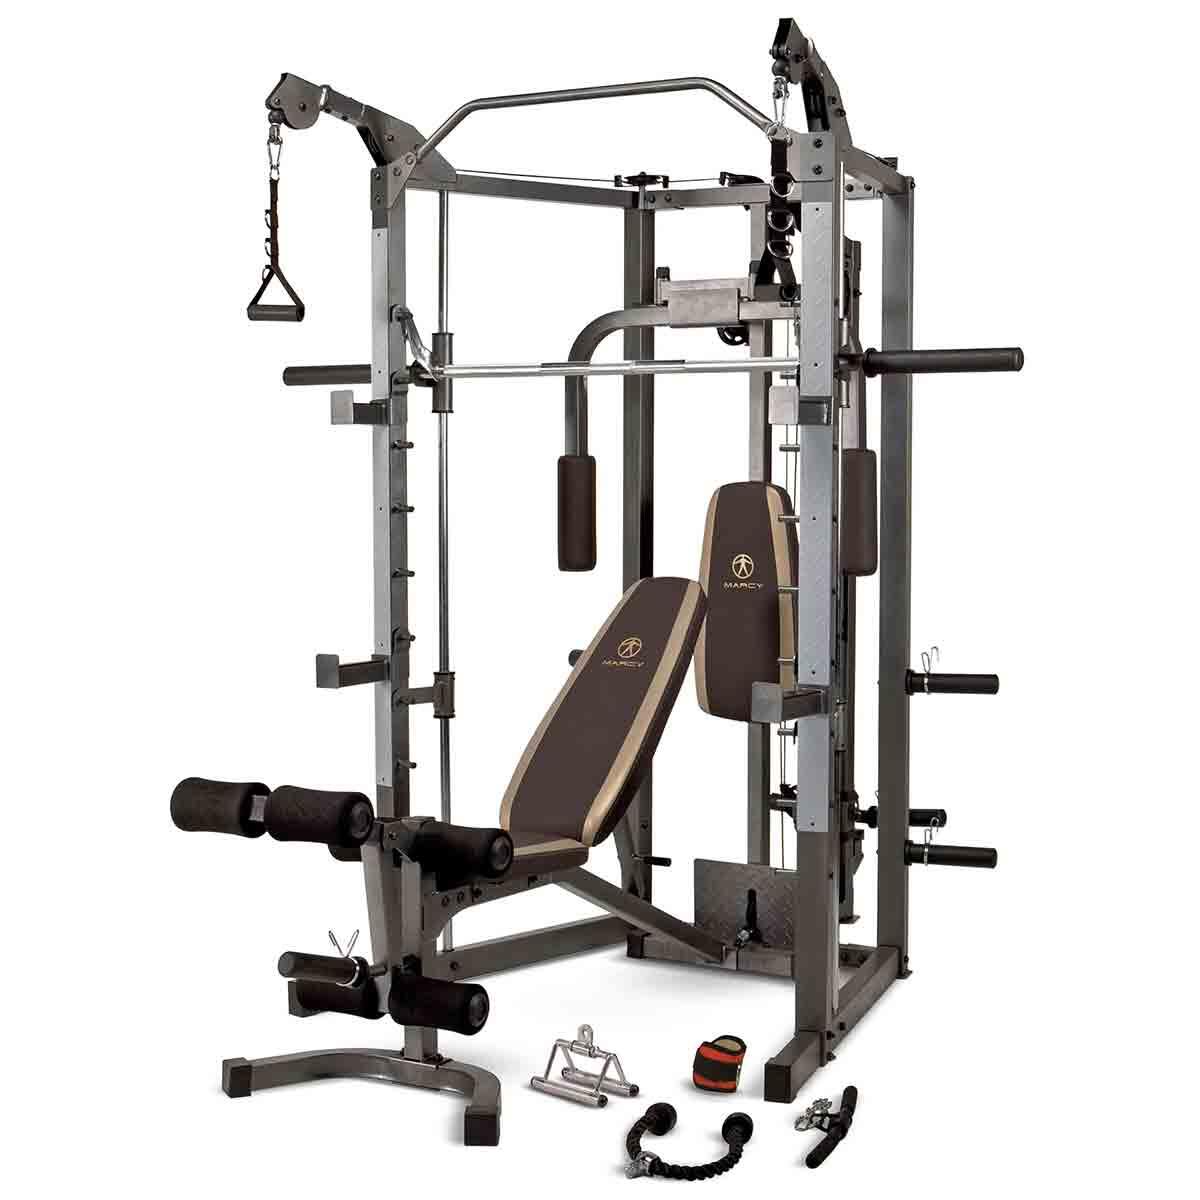 MARCY SM4008 DELUXE SMITH MACHINE HOME GYM WITH WEIGHT BENCH 1/7